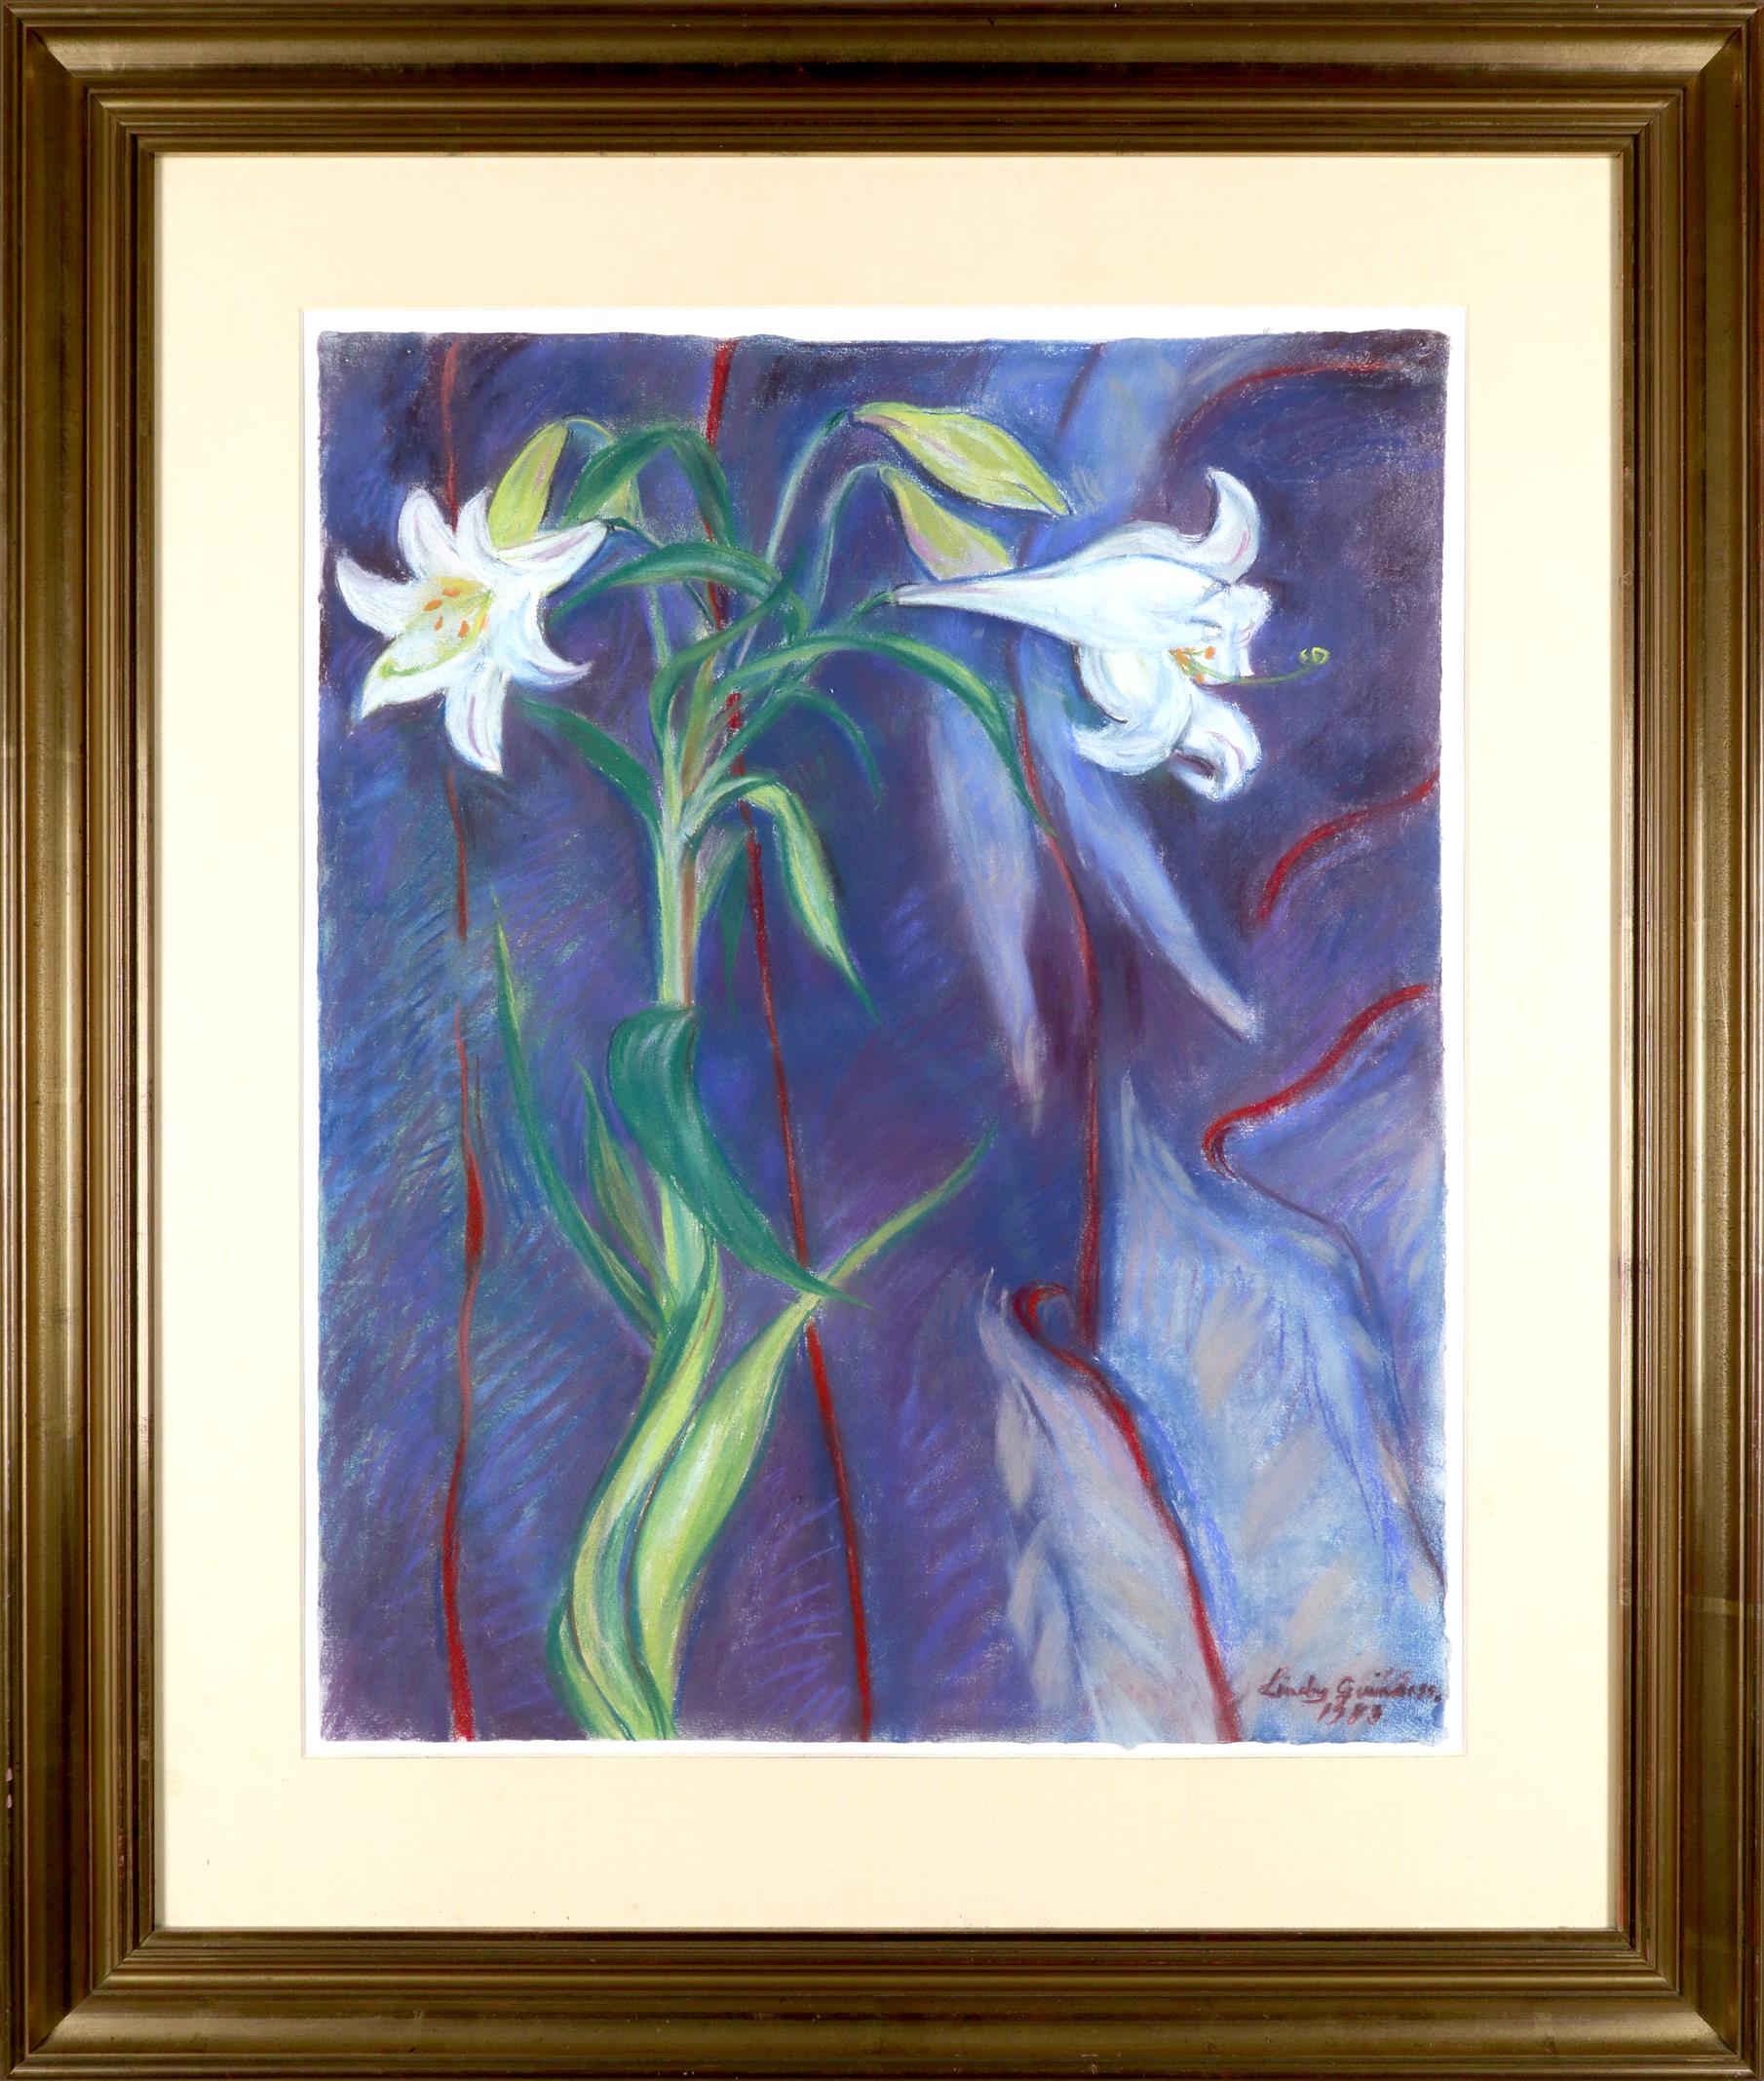 ‡Lindy Guinness (1941-2020) Easter lillies Signed and dated Lindy Guinness/1983 (lower right) Pastel - Image 2 of 3